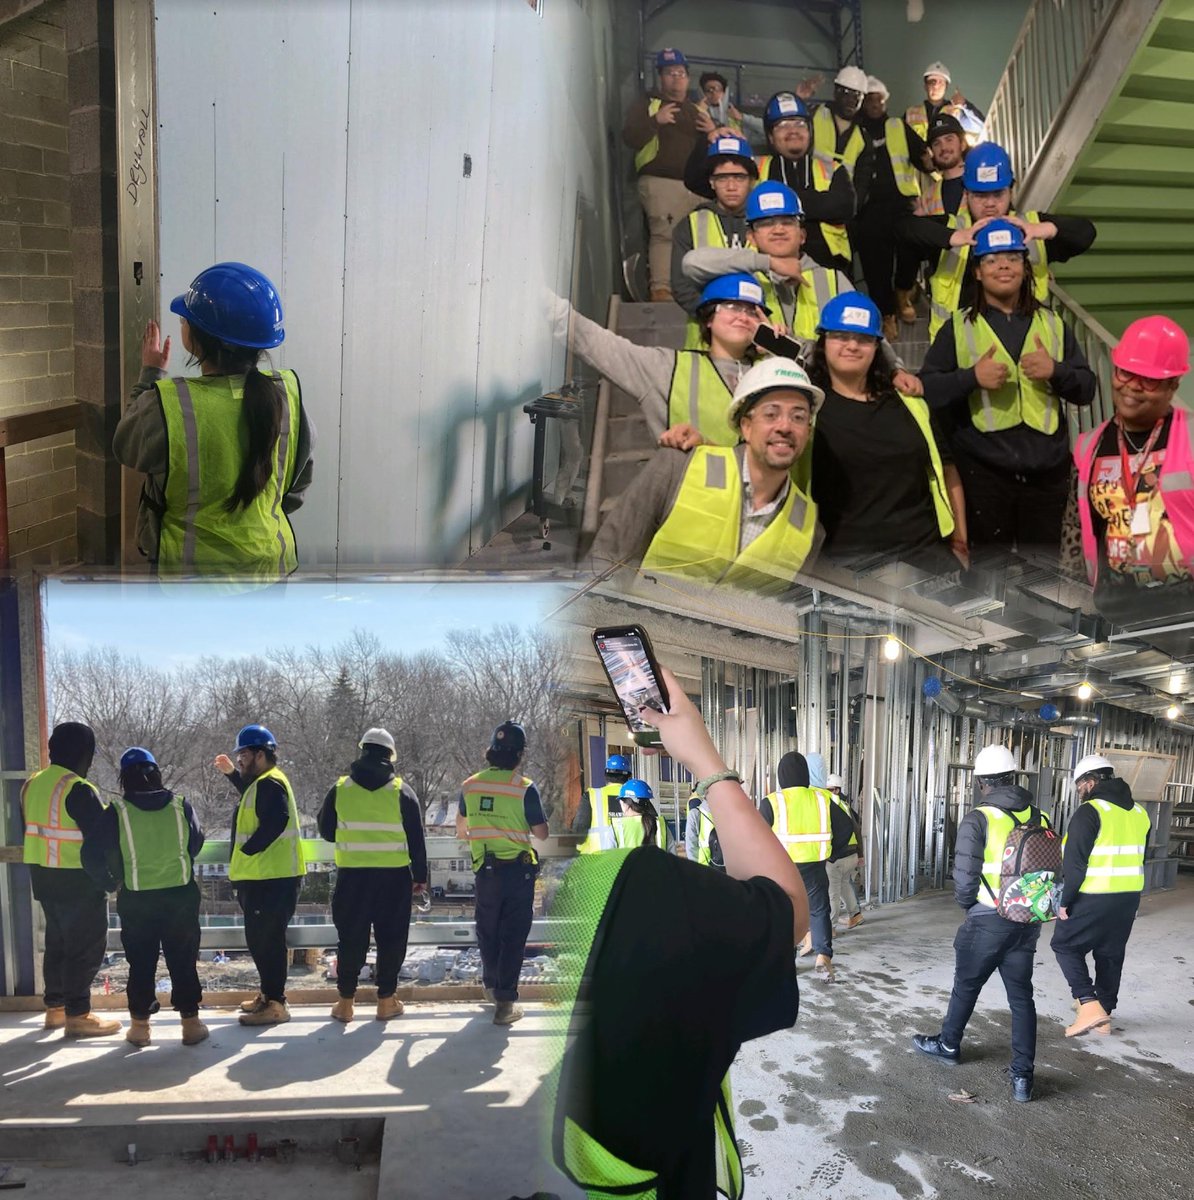 Our MP Scholars are on an exciting field trip to The Tobin K-8 in Cambridge as part of the Tremco Rising Stars program!  It's a day filled with learning and inspiration. Follow along for updates! #MPscholars #TremcoRisingStars #Education #FieldTrip #CambridgeSchools